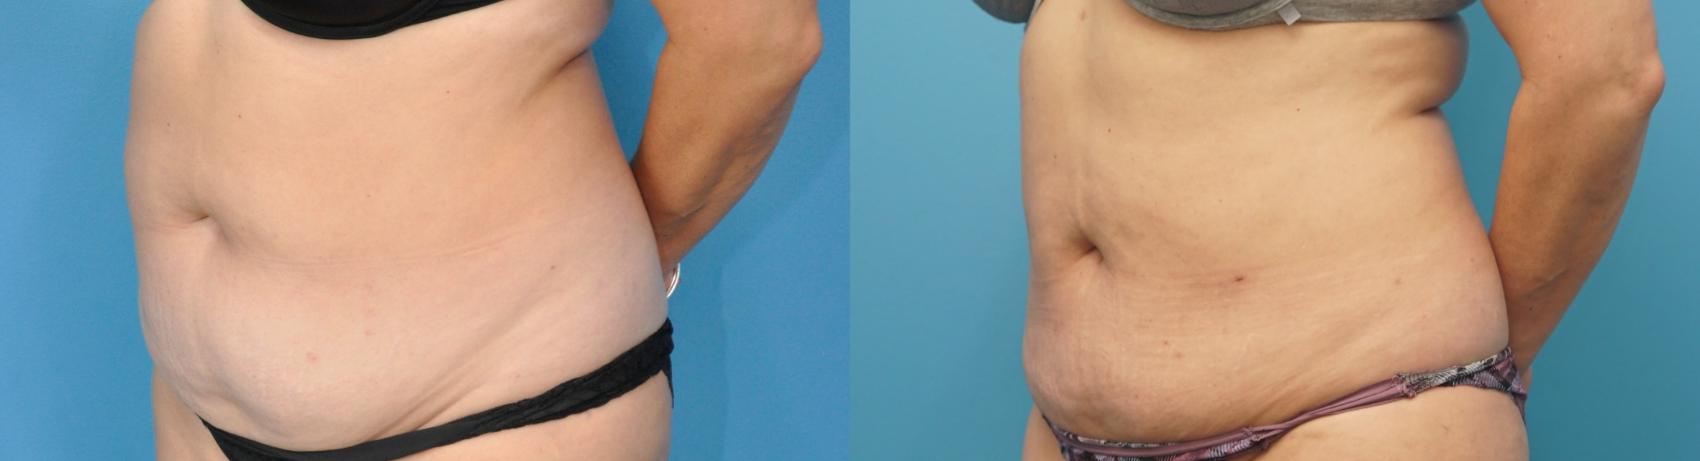 Before & After Abdominoplasty/Tummy Tuck Case 279 Front View in Northbrook, IL